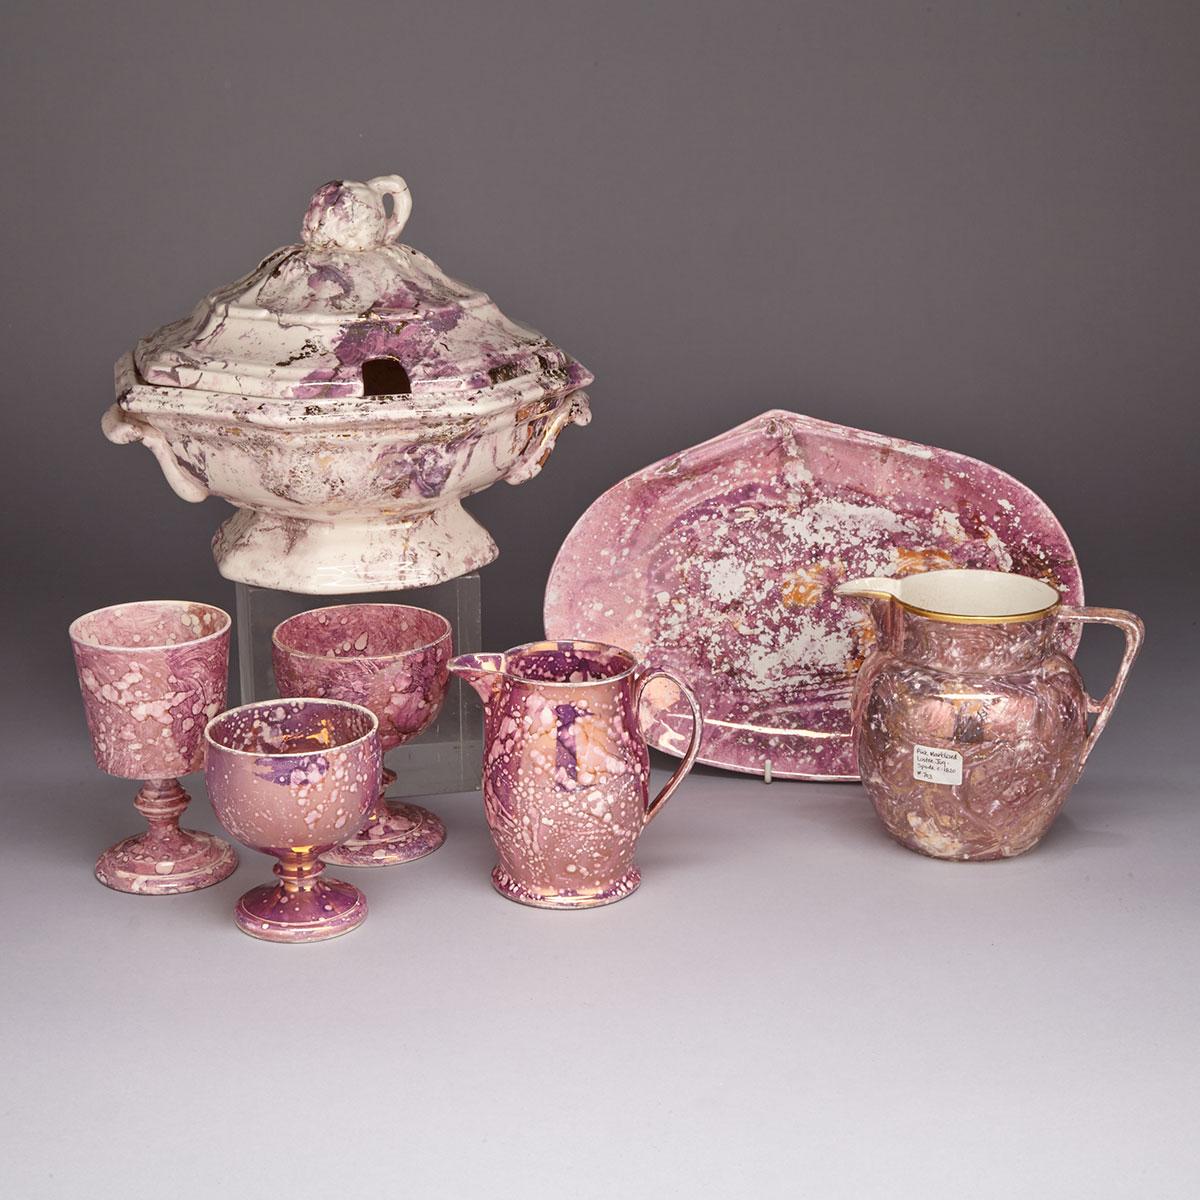 Group of Pink Lustre Wares. 19th century